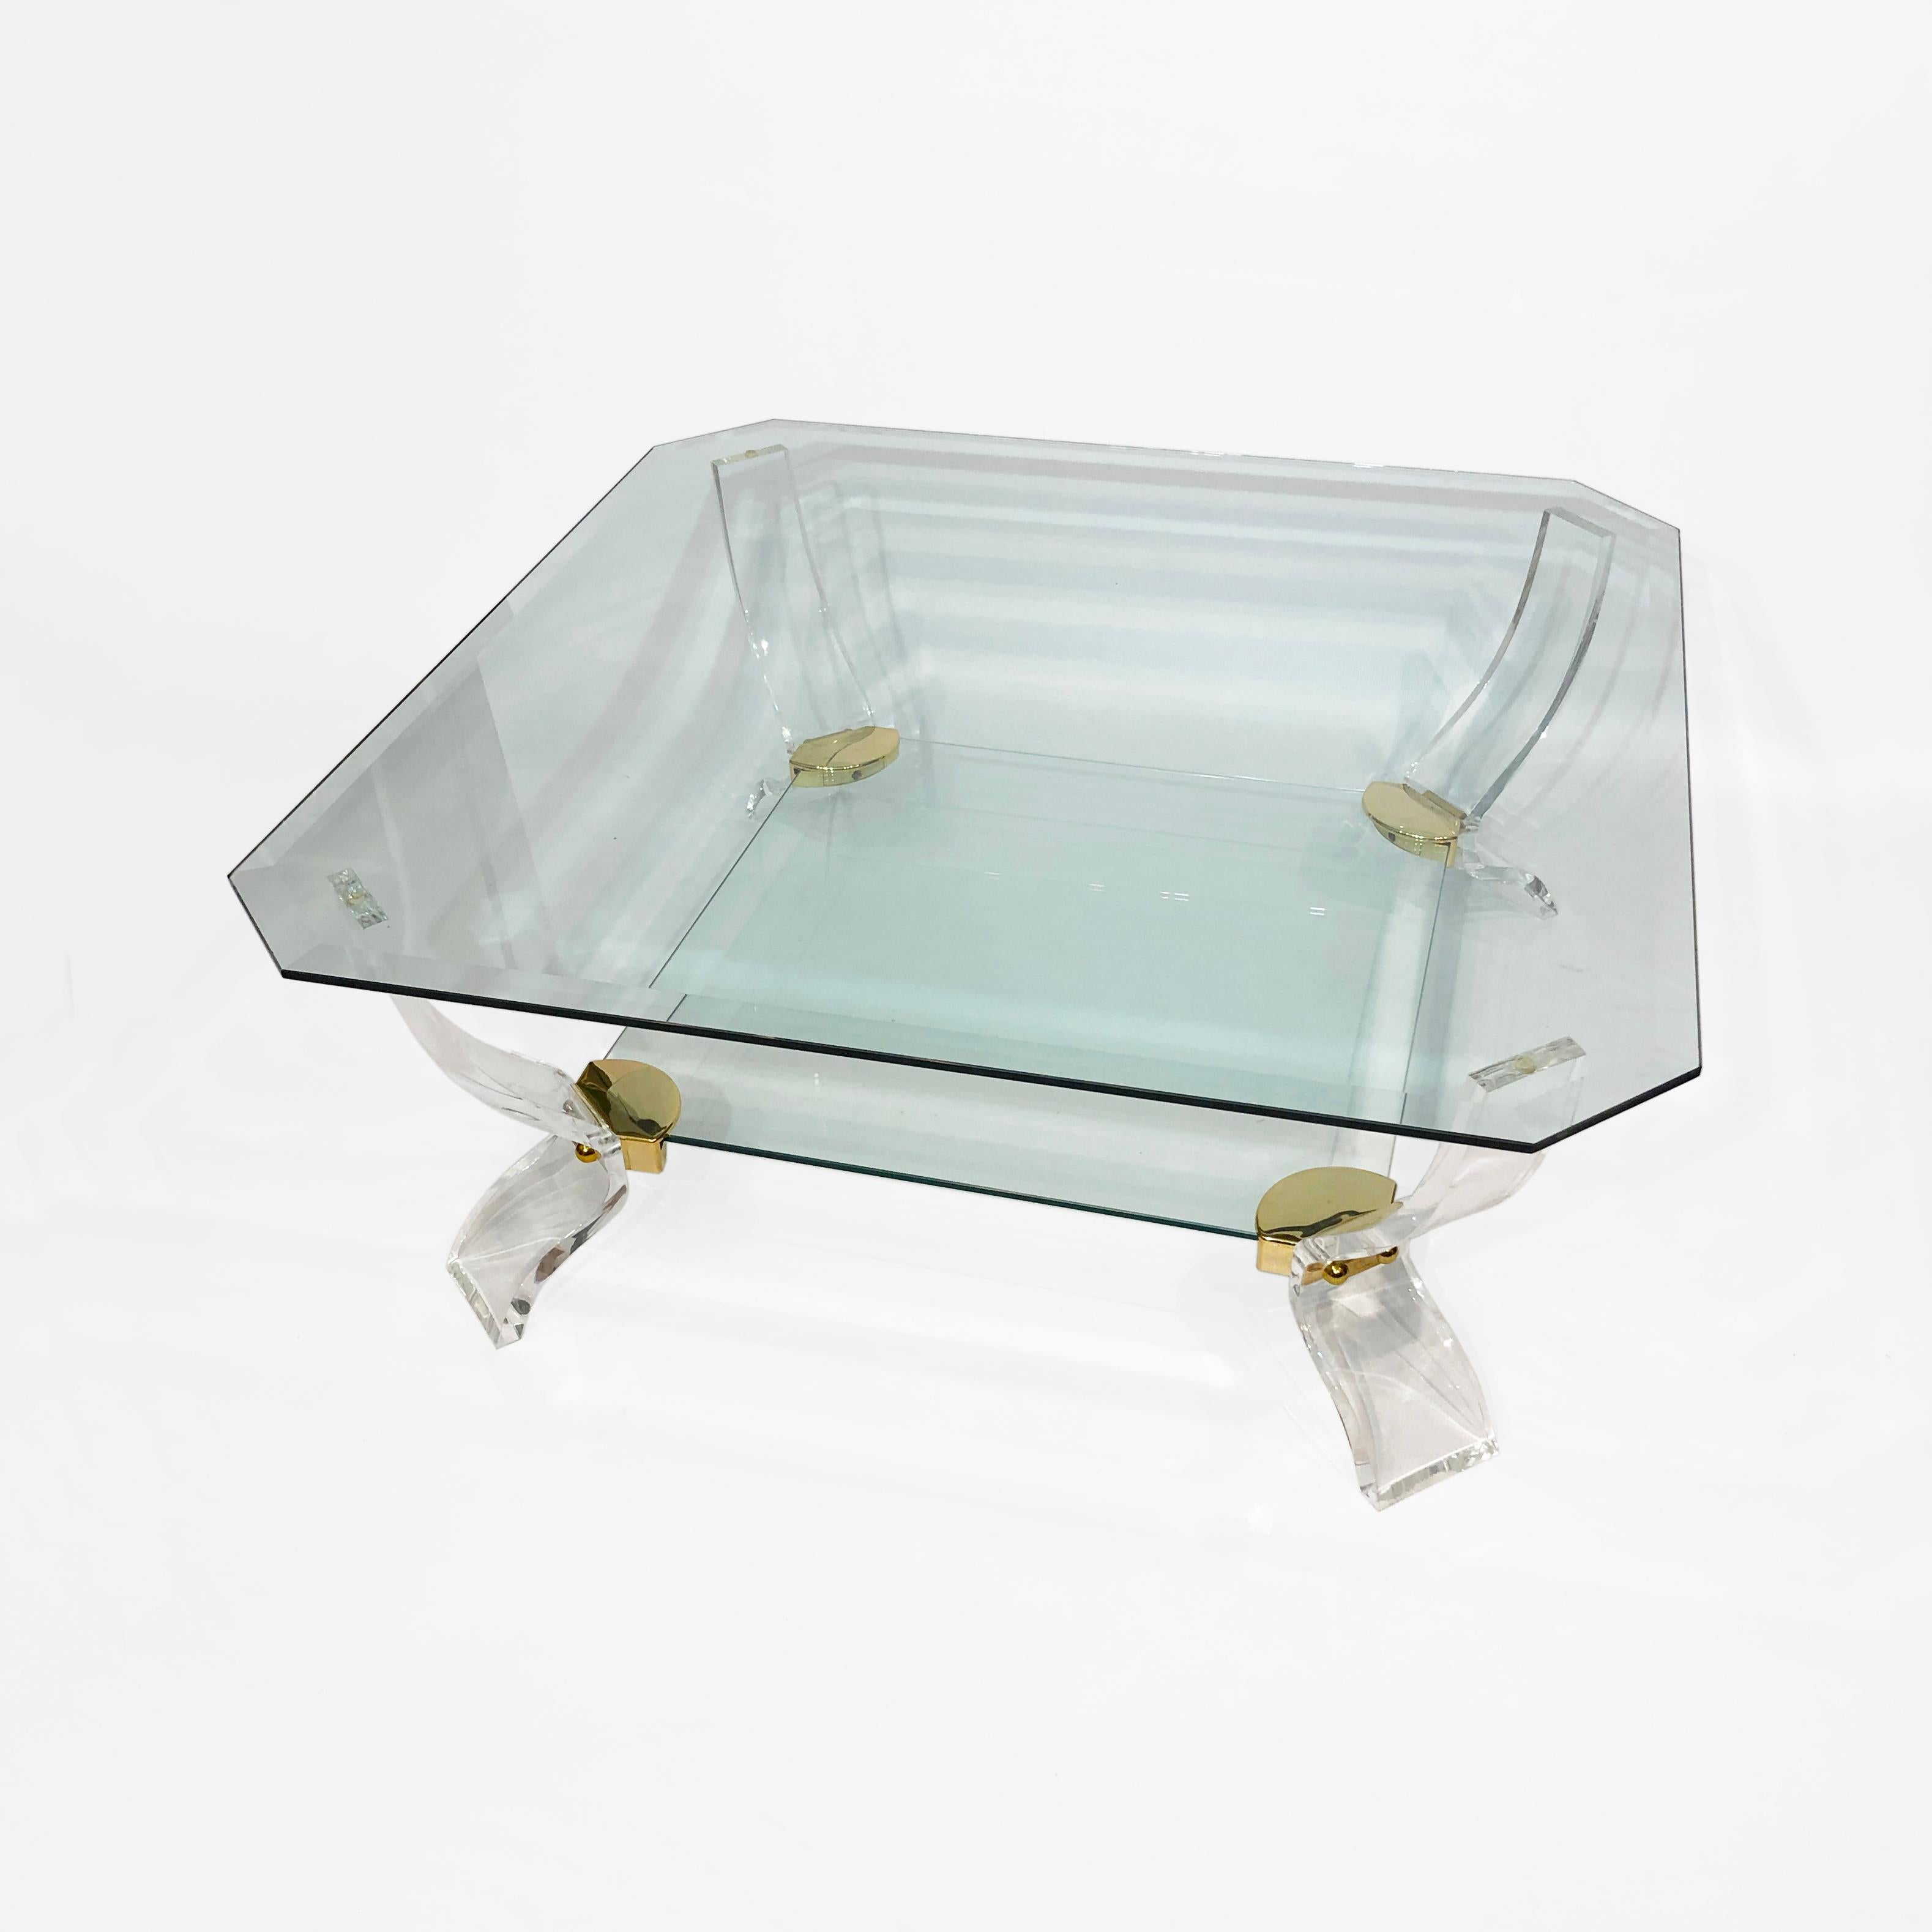 Hollywood Regency Lucite Glass brass Coffee Table 1980s Midcentury Charles Hollis Jones 1970s 80s  For Sale